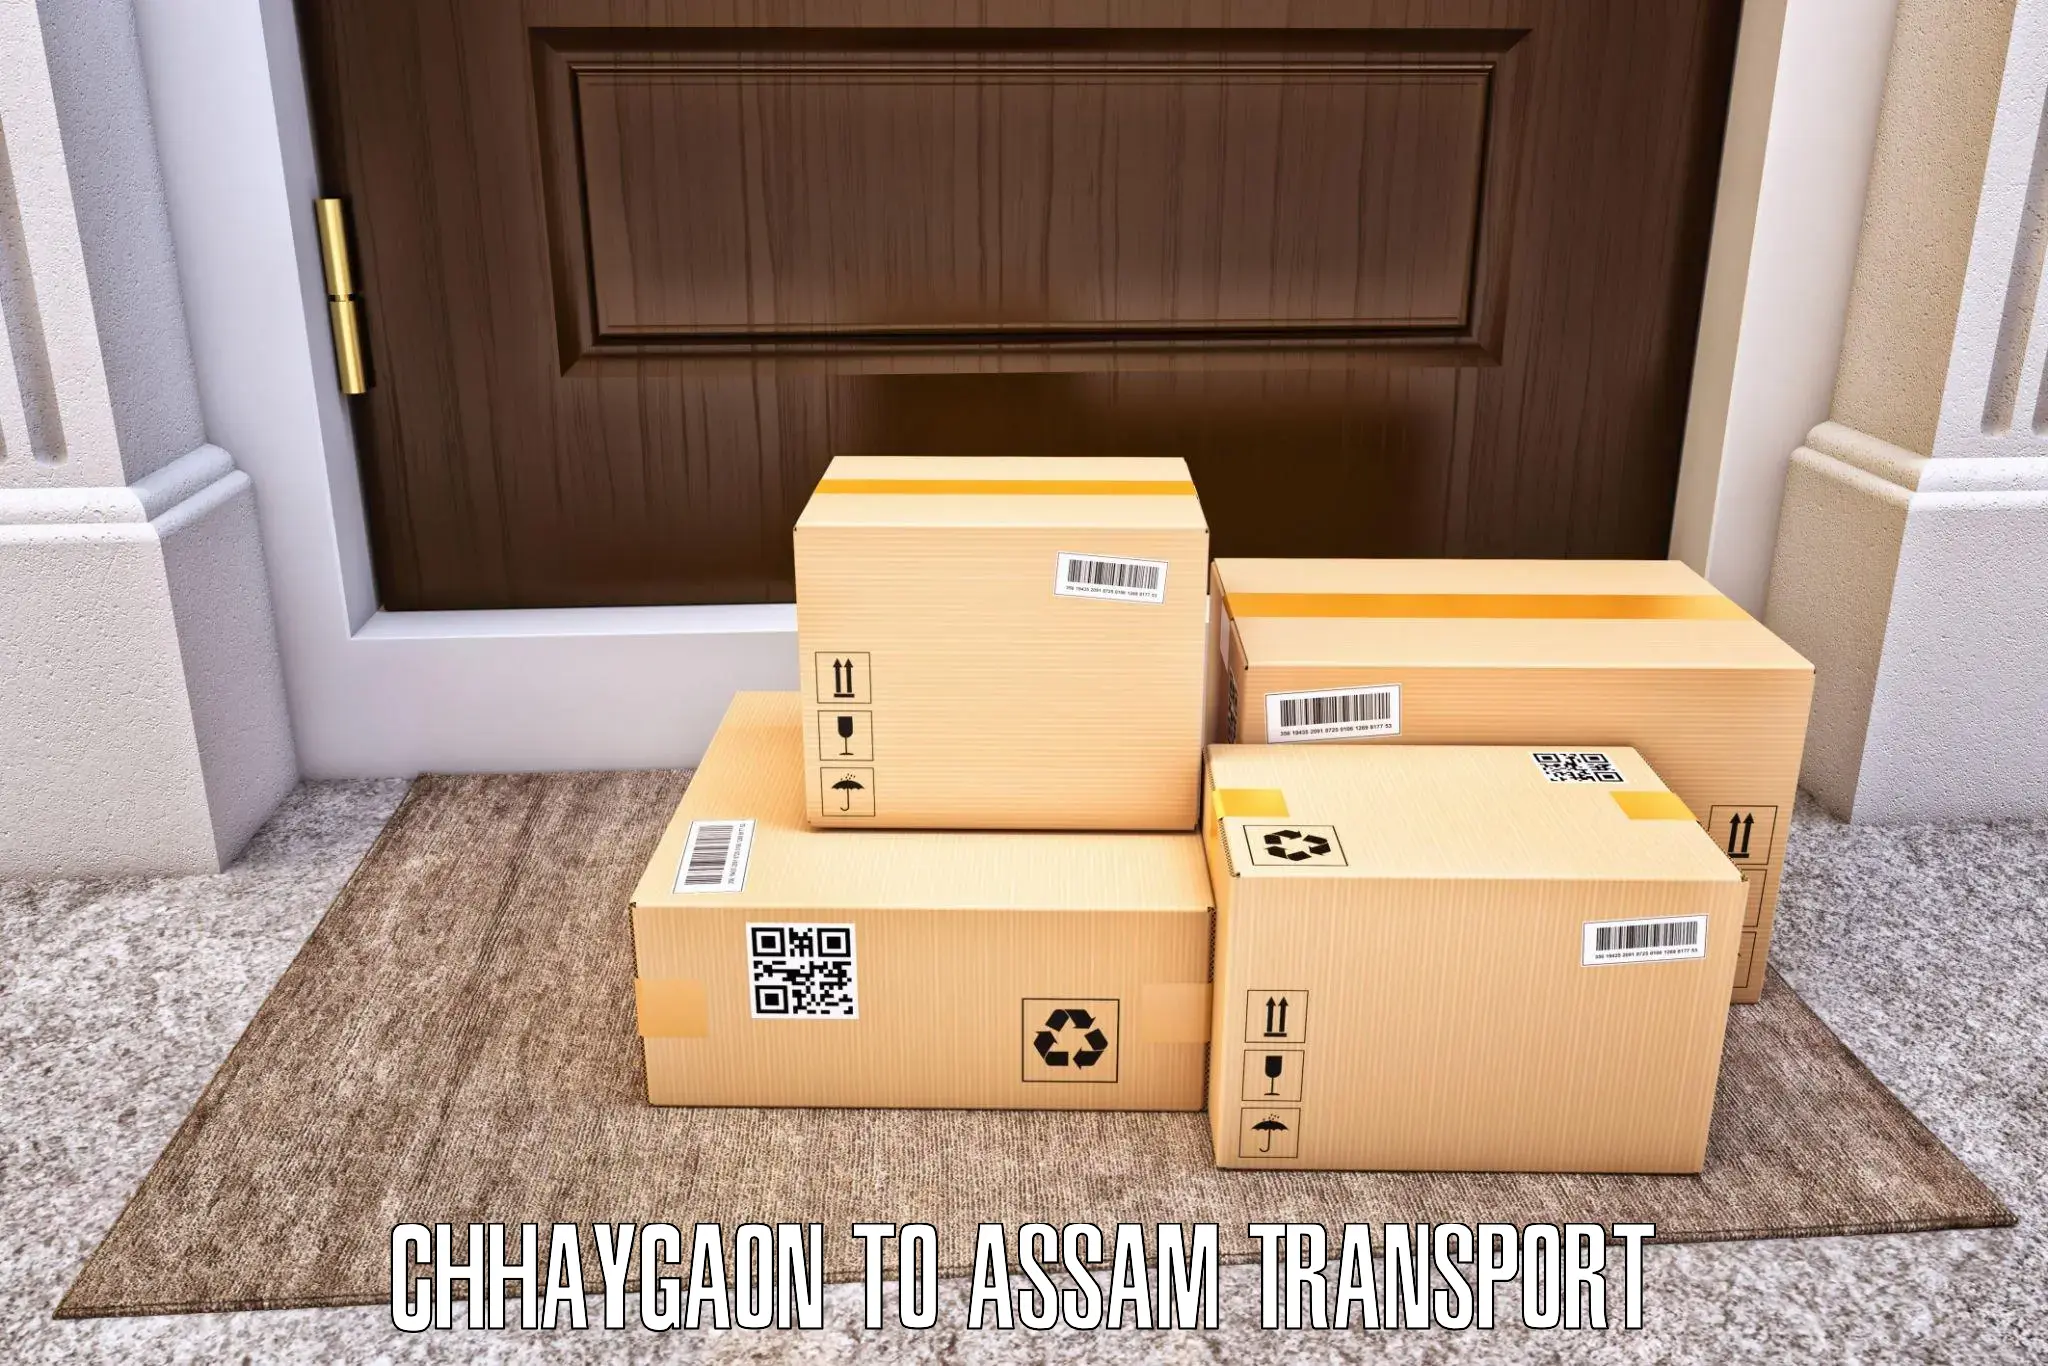 Online transport service Chhaygaon to Gossaigaon